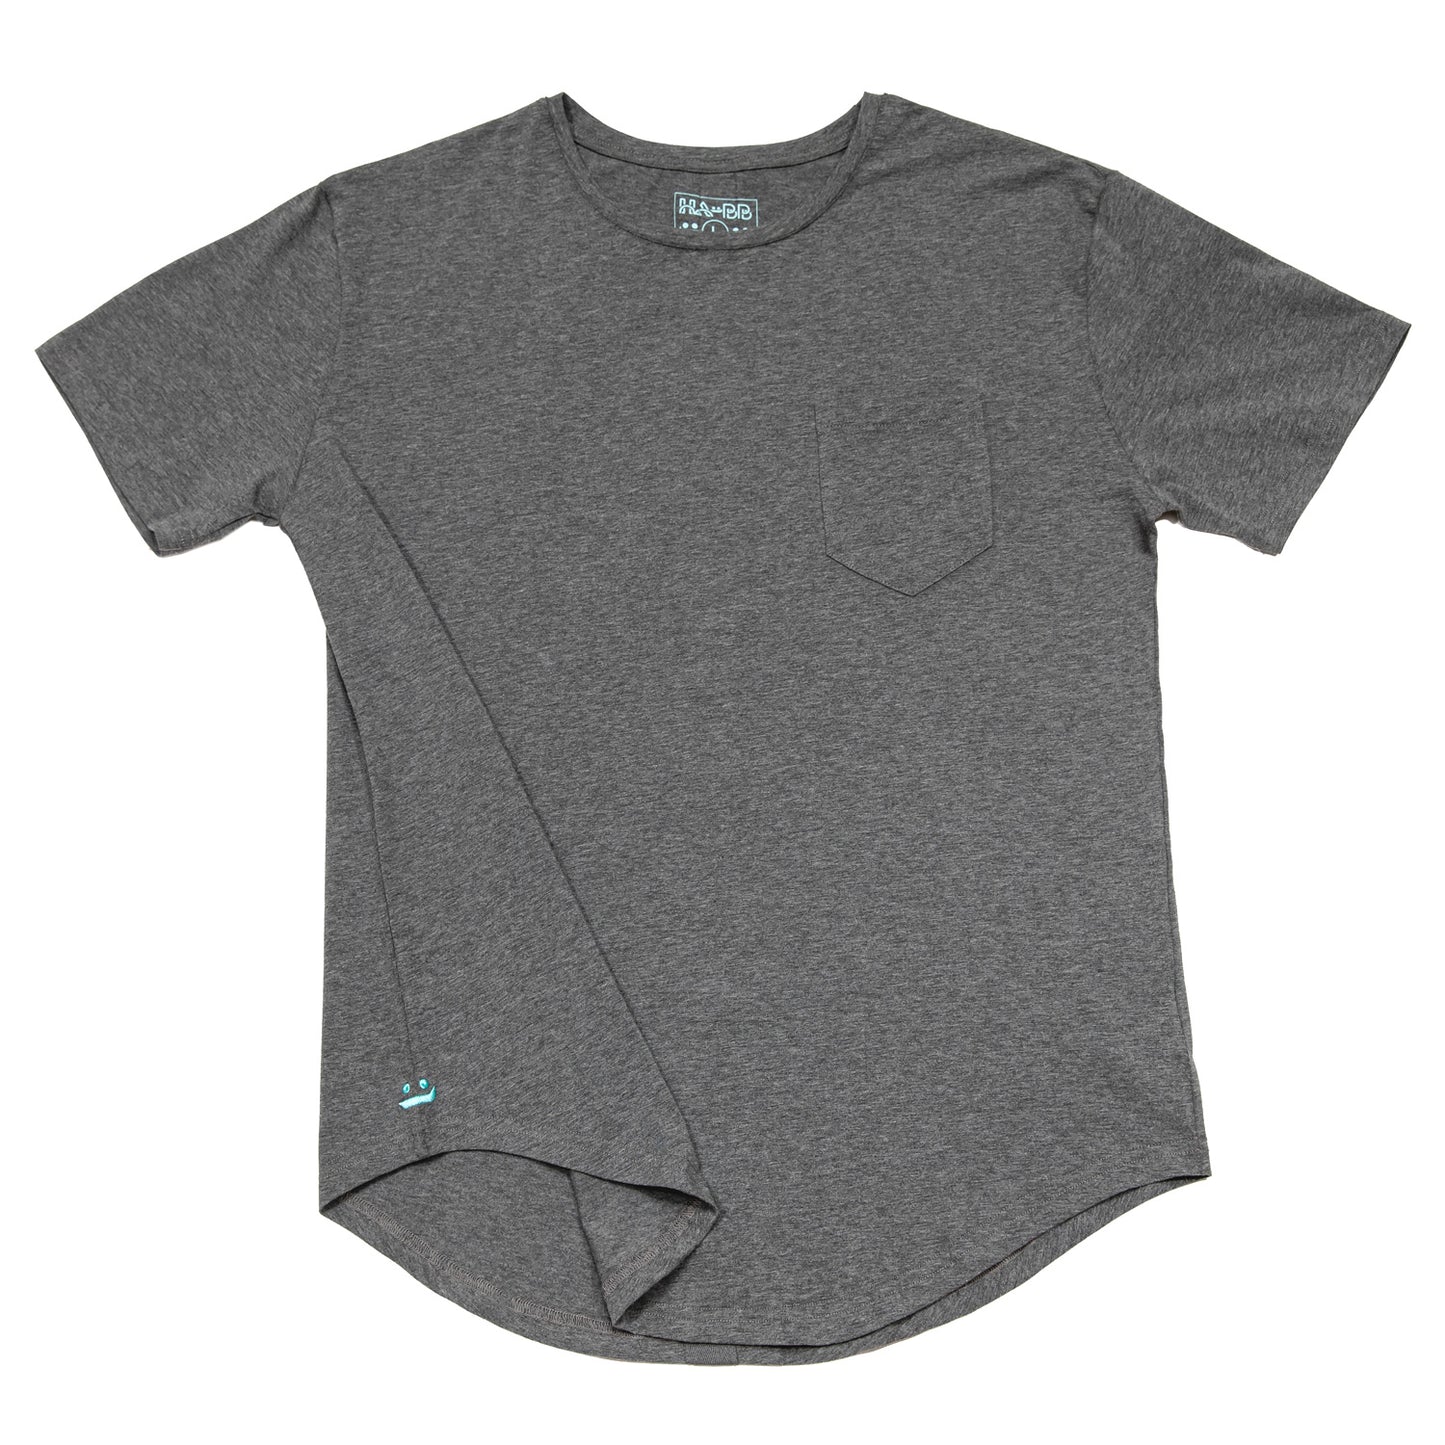 grey T-shirt, tee, front pocket, embroidery signature, iconic, front view, 